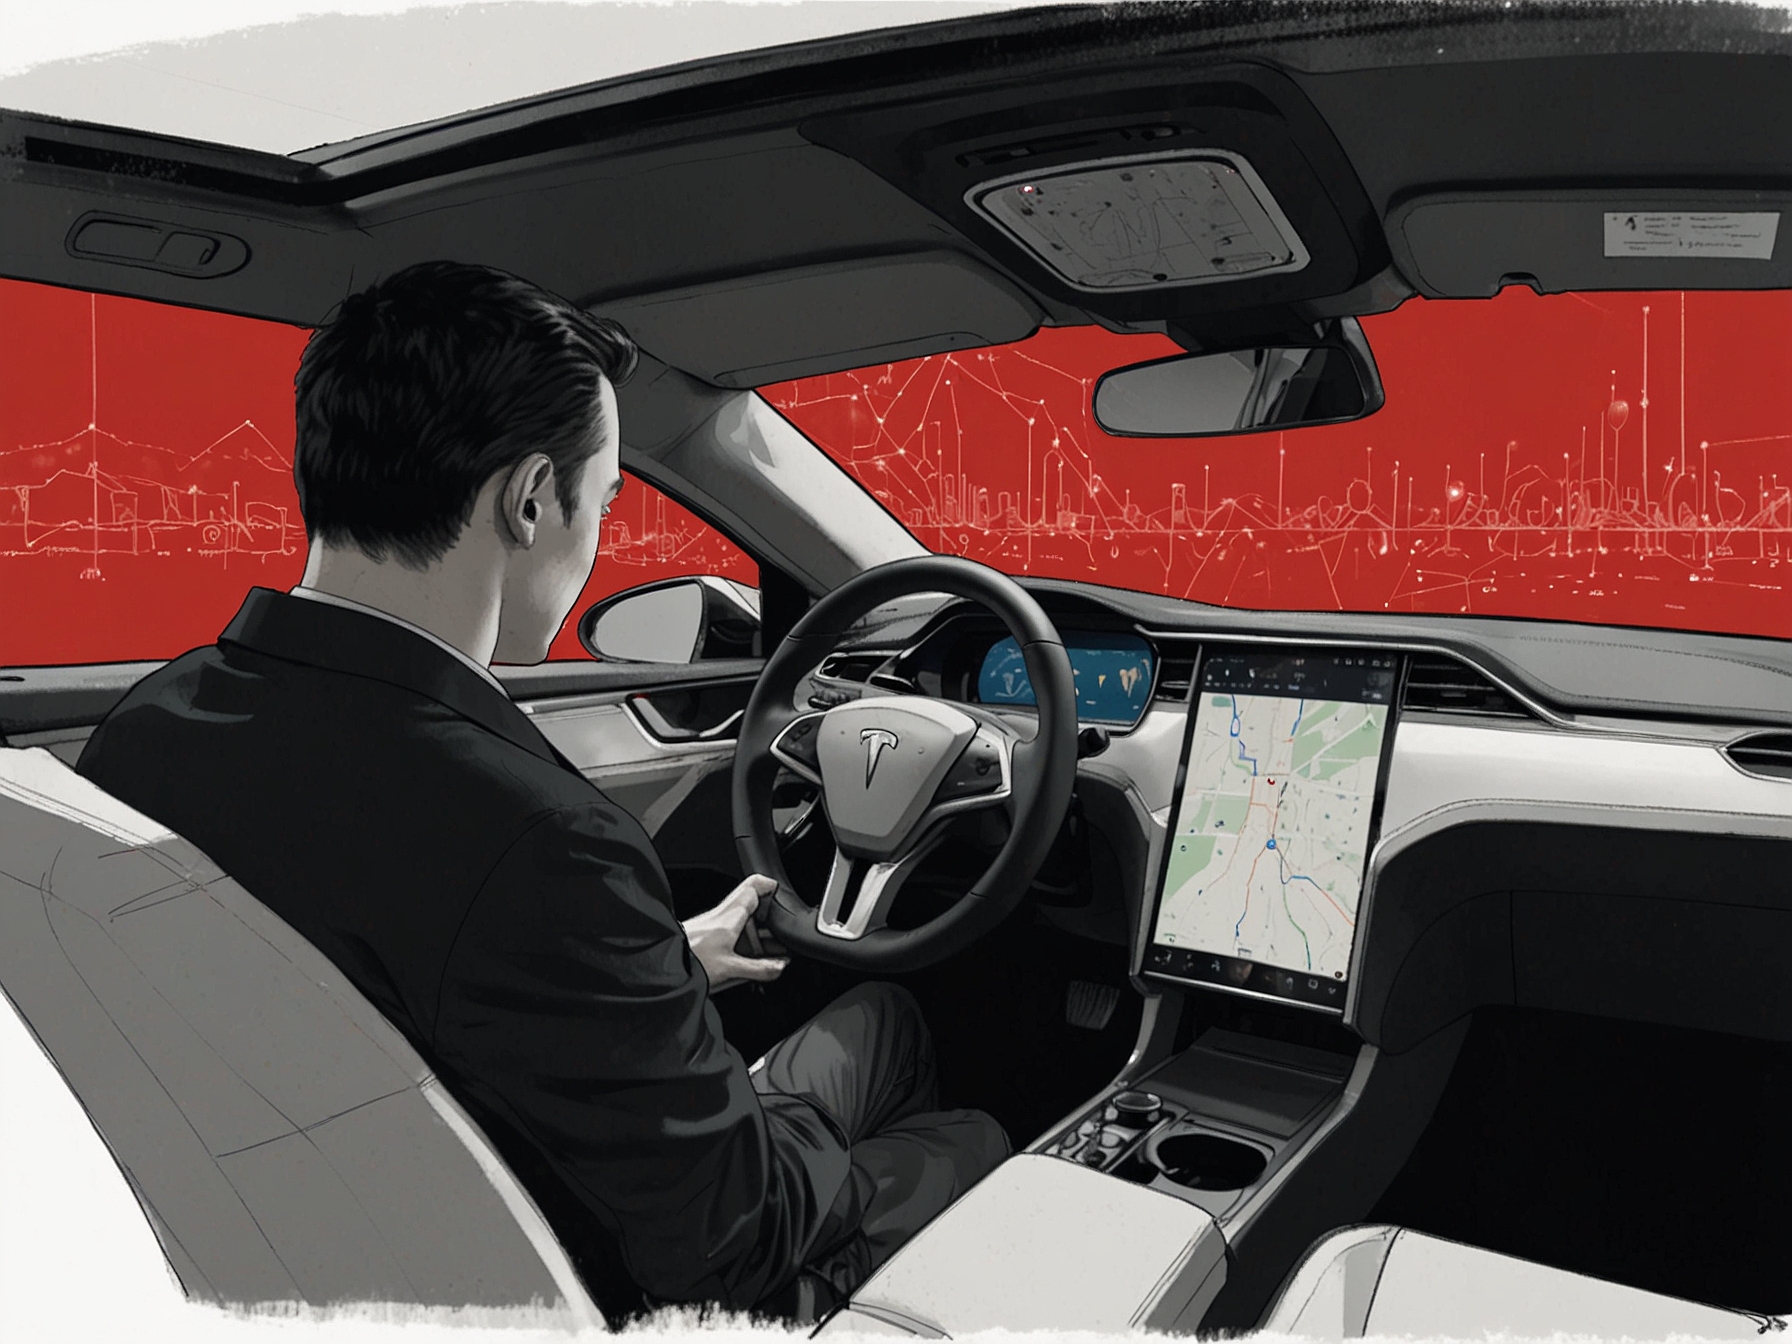 Engineers from Tesla and Baidu analyze data collected from Full Self-Driving tests, highlighting the collaborative effort to enhance AI algorithms and vehicle safety for future autonomous driving applications.